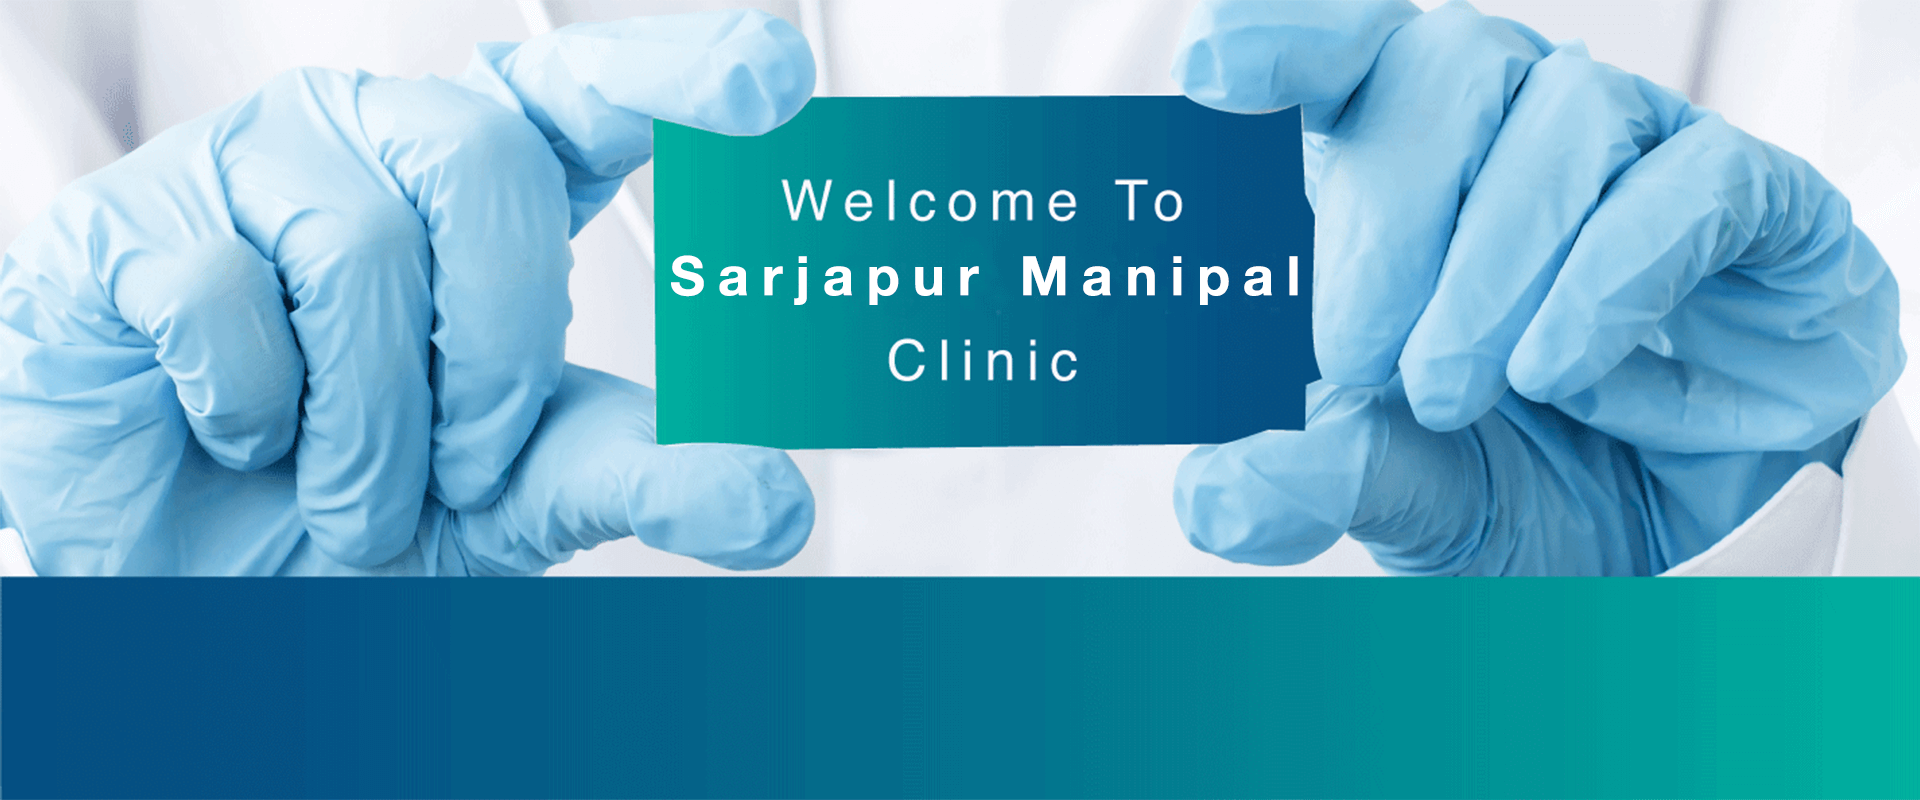 Best Multi Speciality Hospital in Sarjapur, Bangalore | Manipal Hospitals